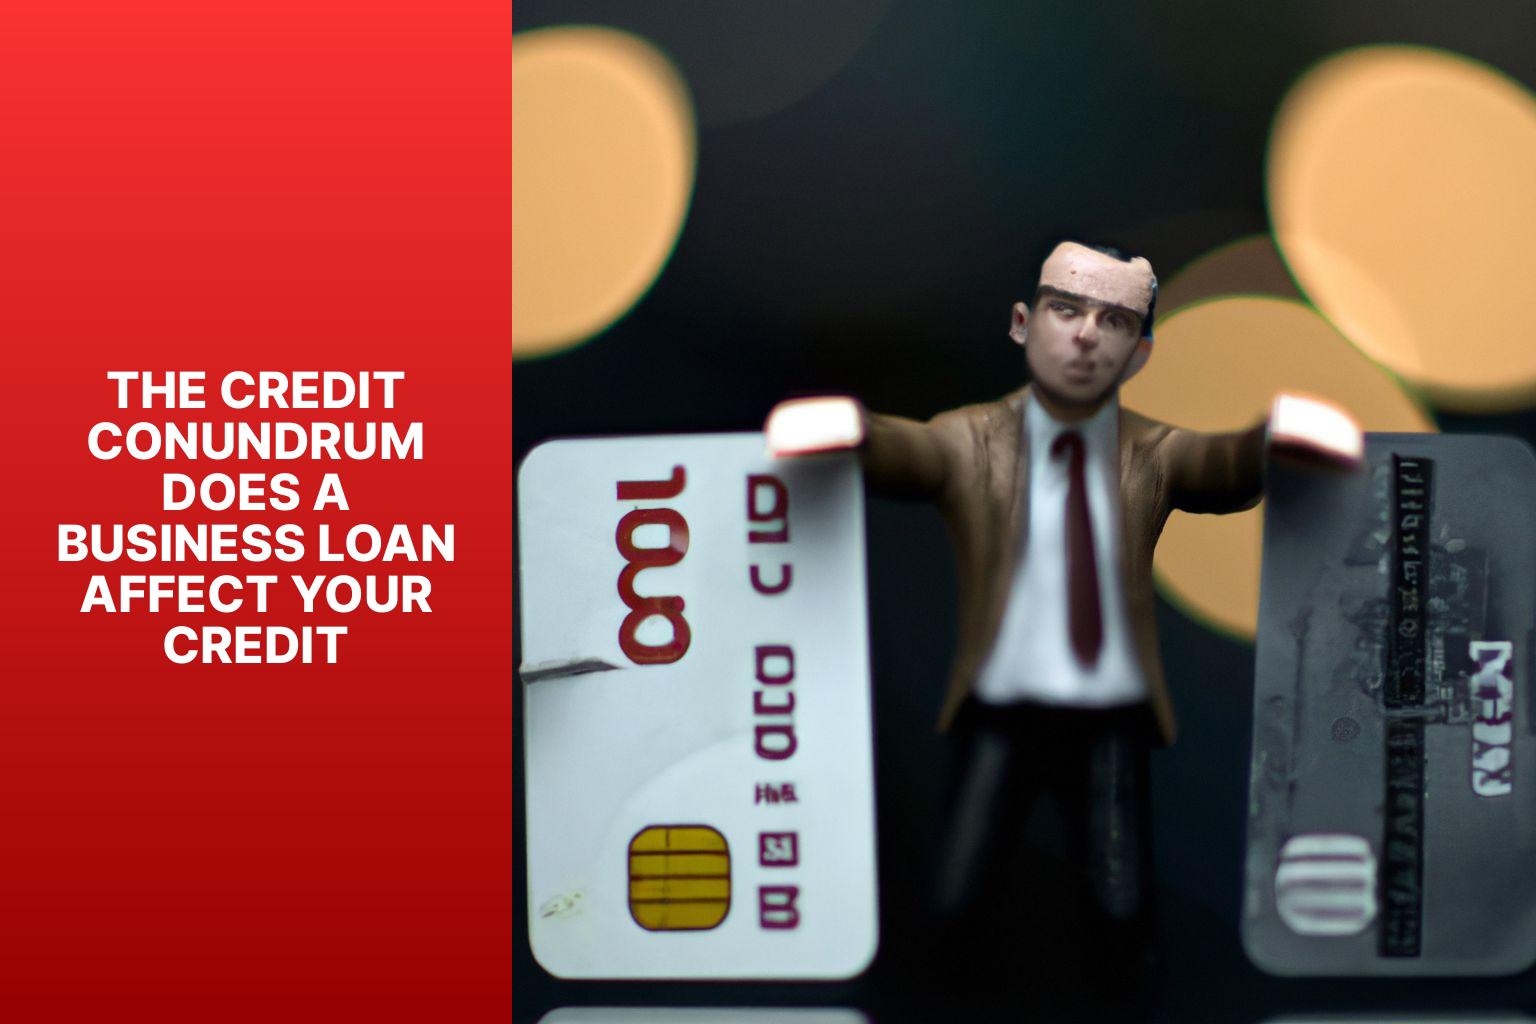 The Credit Conundrum Does a Business Loan Affect Your Credit